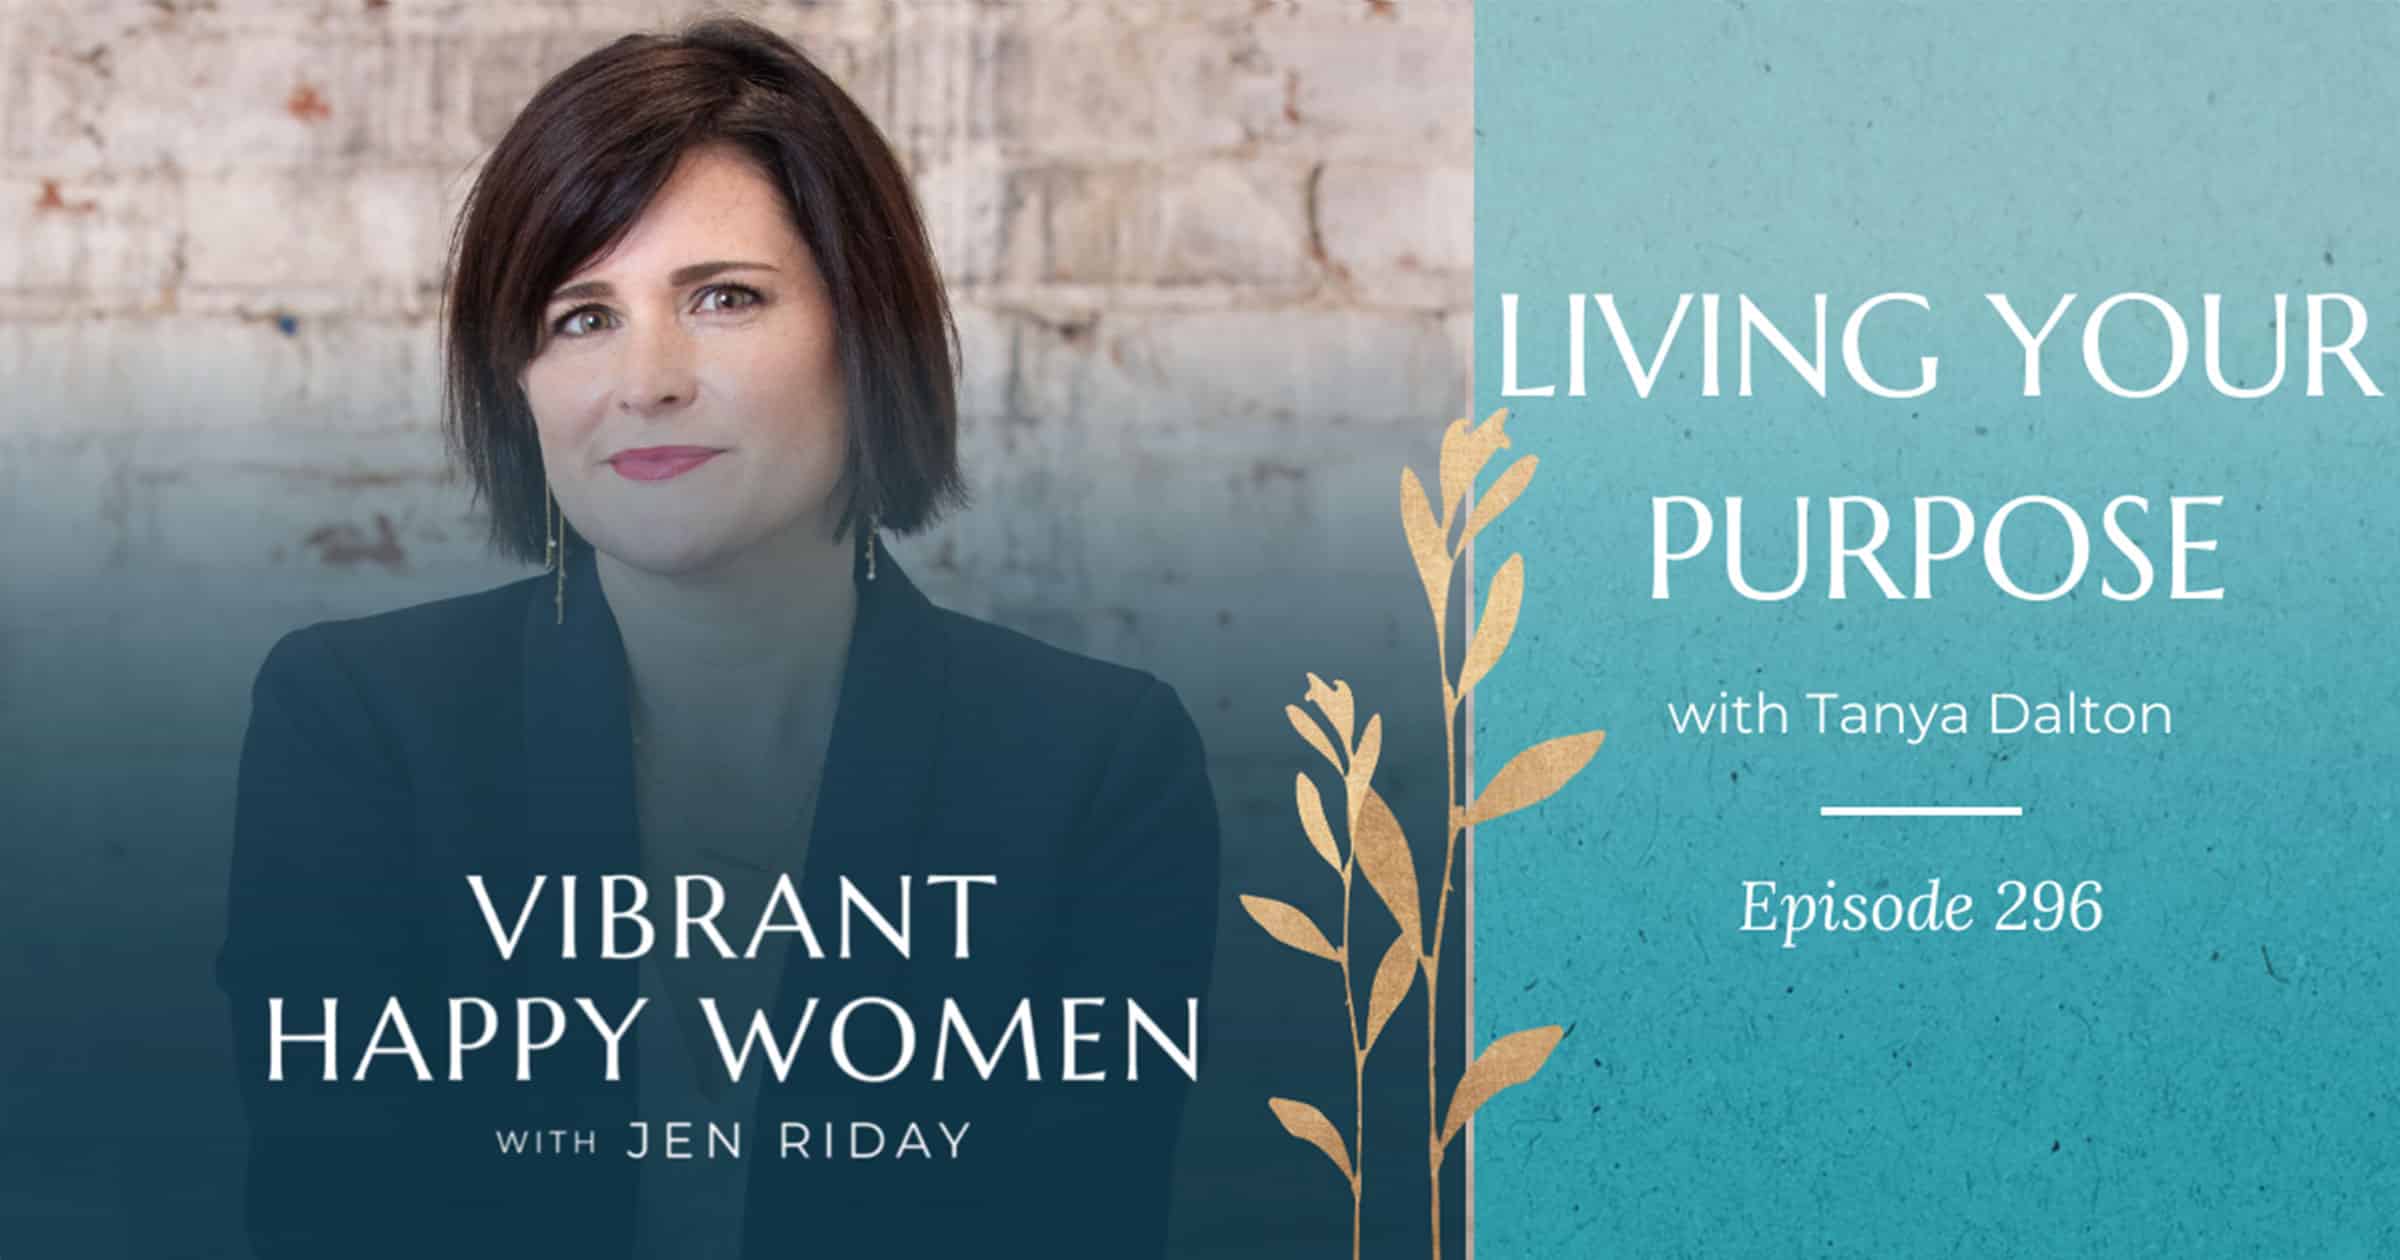 Vibrant Happy Women with Dr. Jen Riday | Living Your Purpose (with Tanya Dalton)